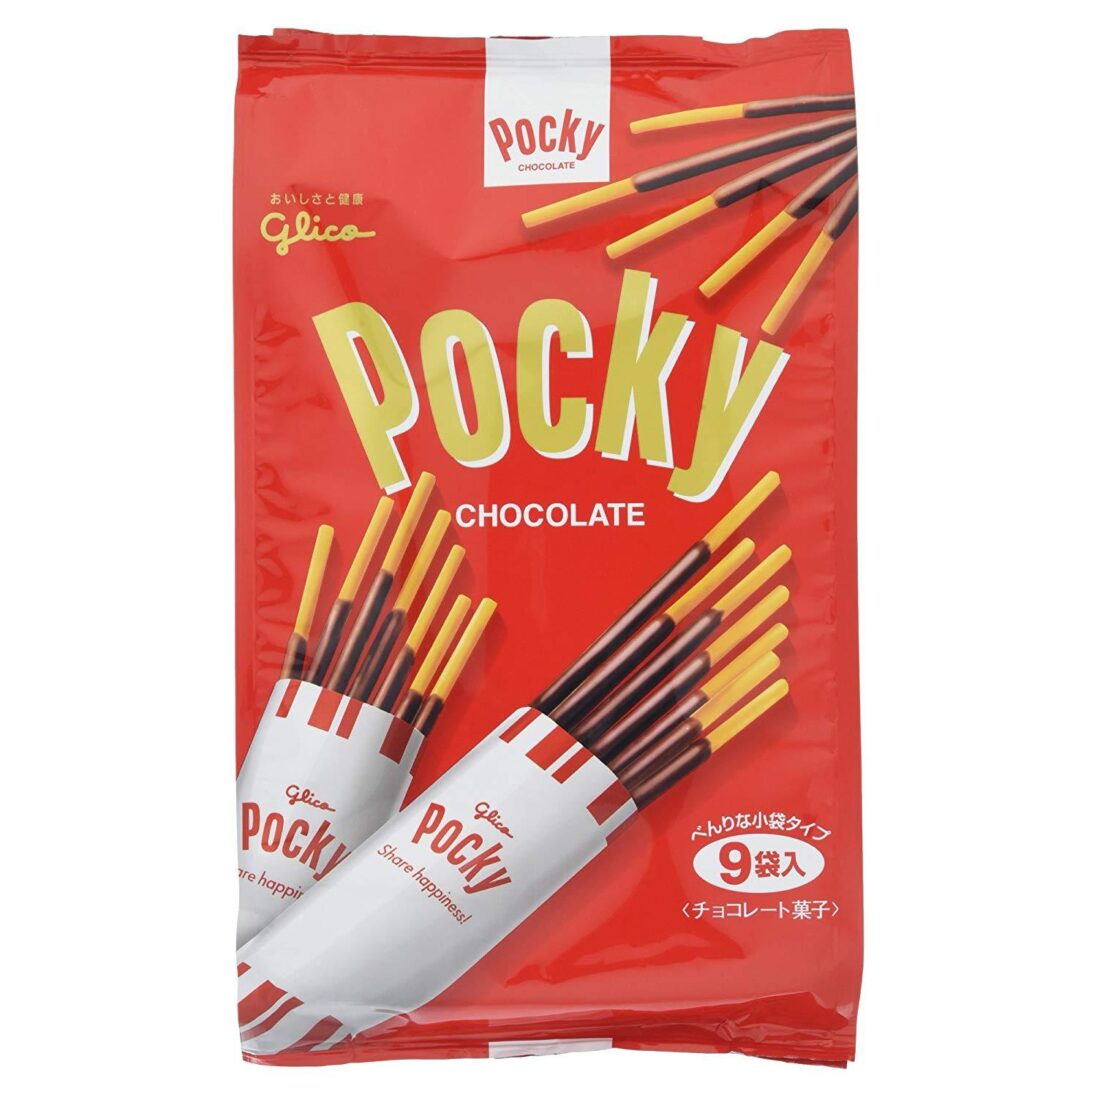 Glico Pocky Chocolate Biscuit Sticks (Pack of 6)